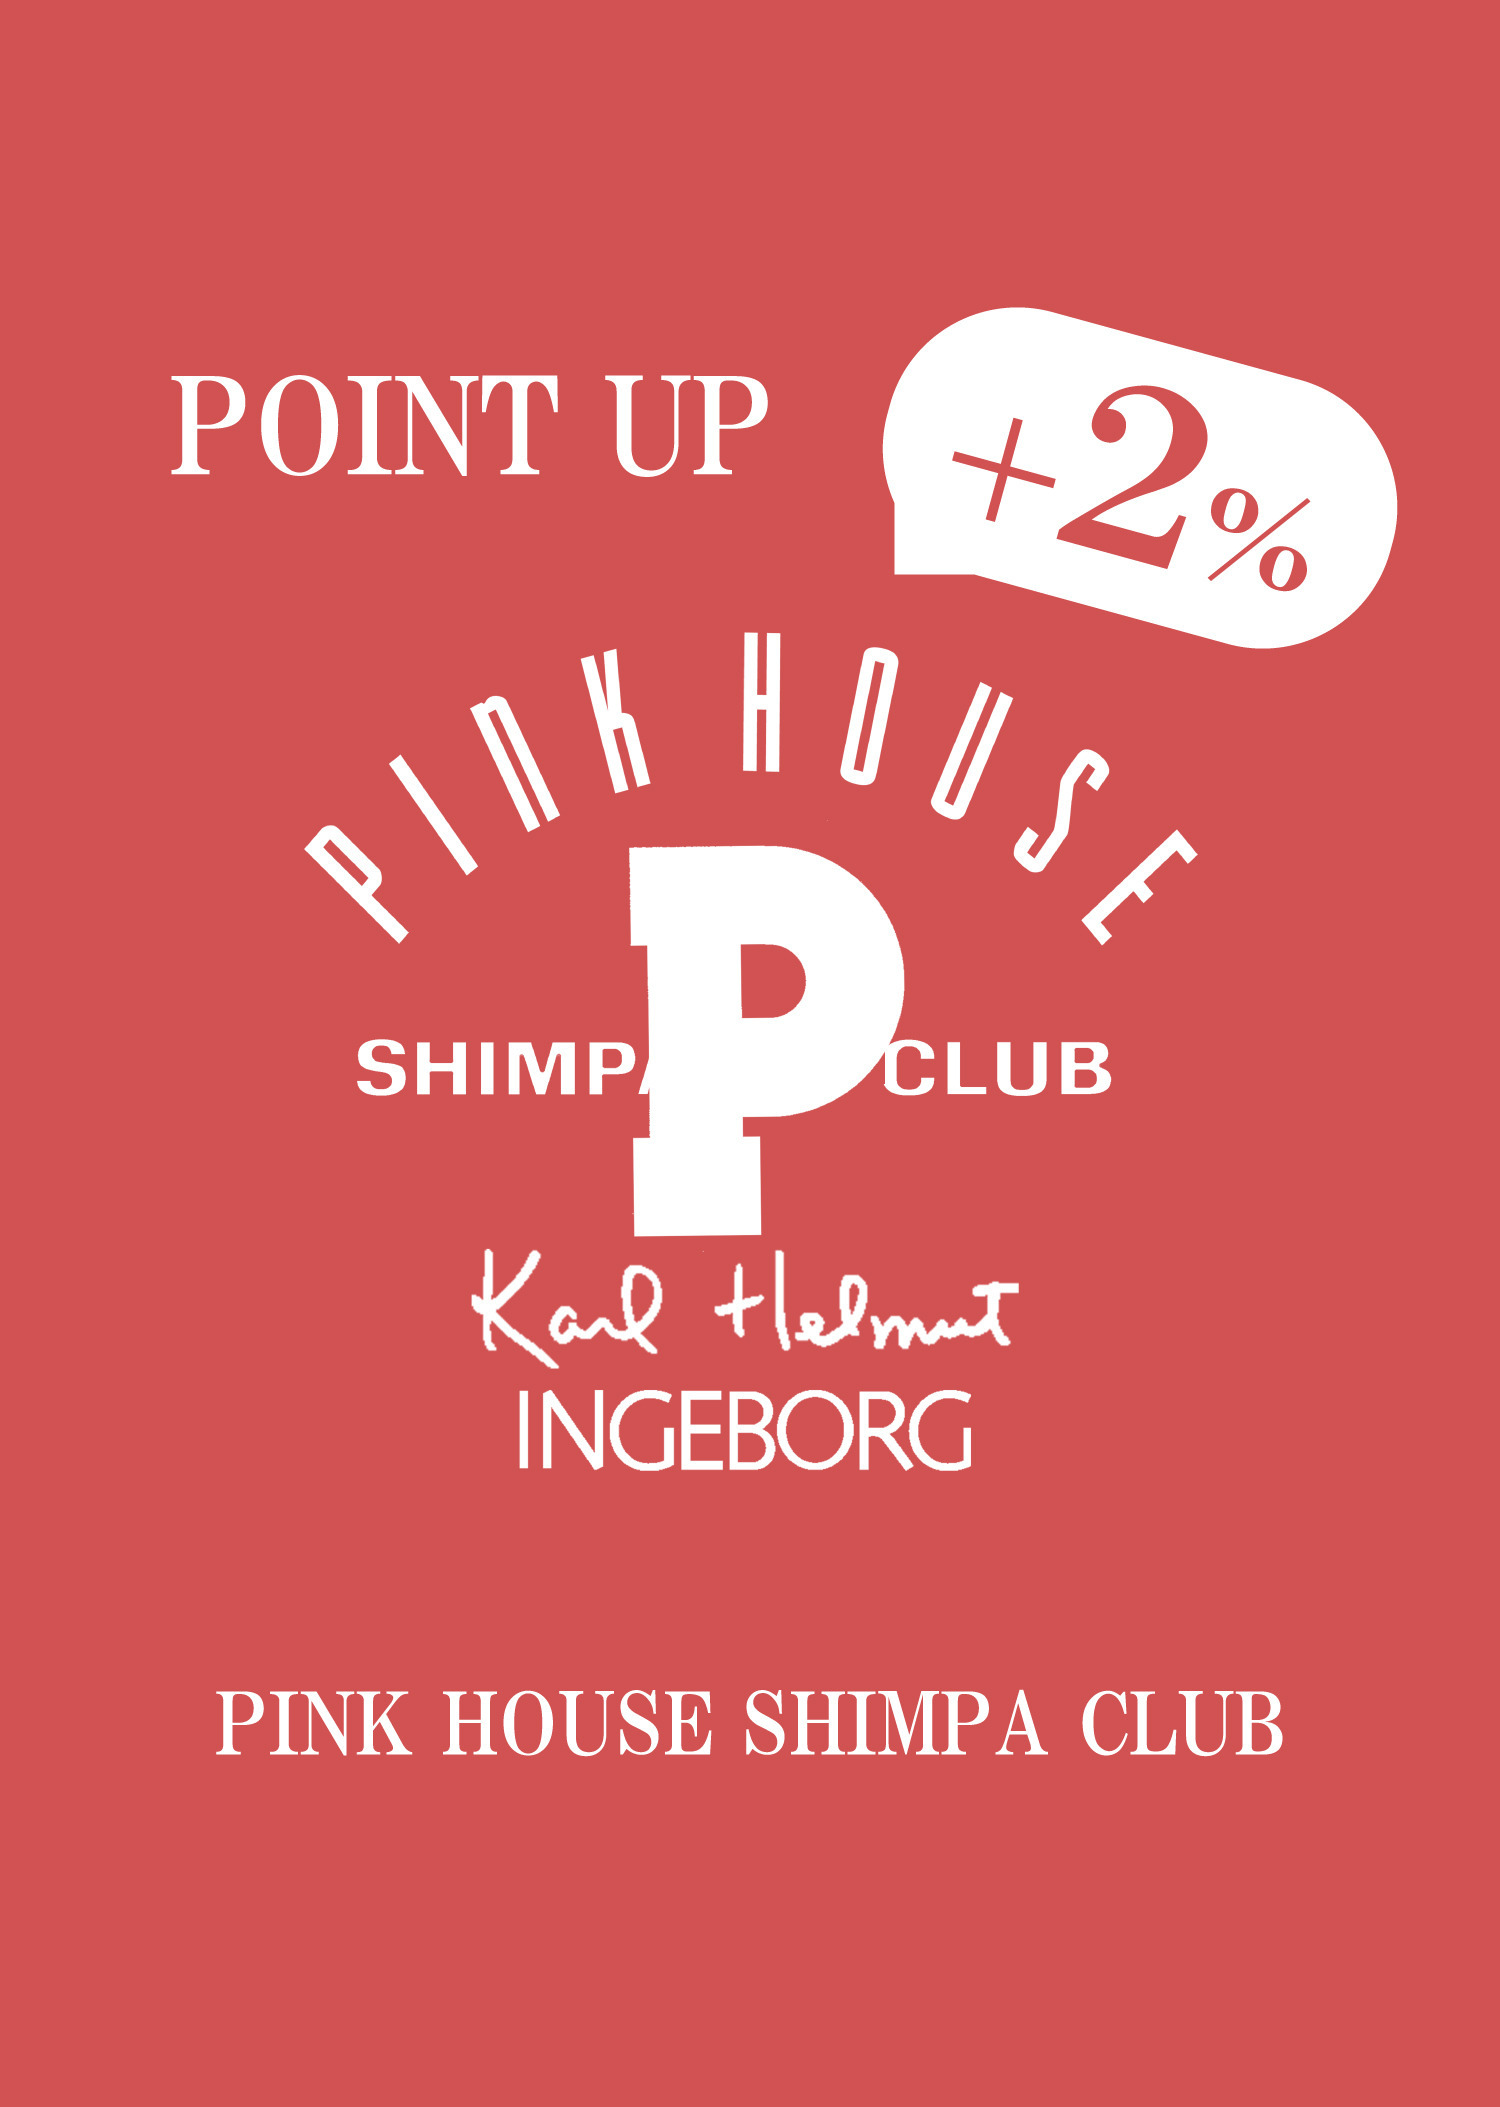 PINK HOUSE SHIMPA CLUB ＋2％ POINT UP campaign 3/15(fri)～20(wed)